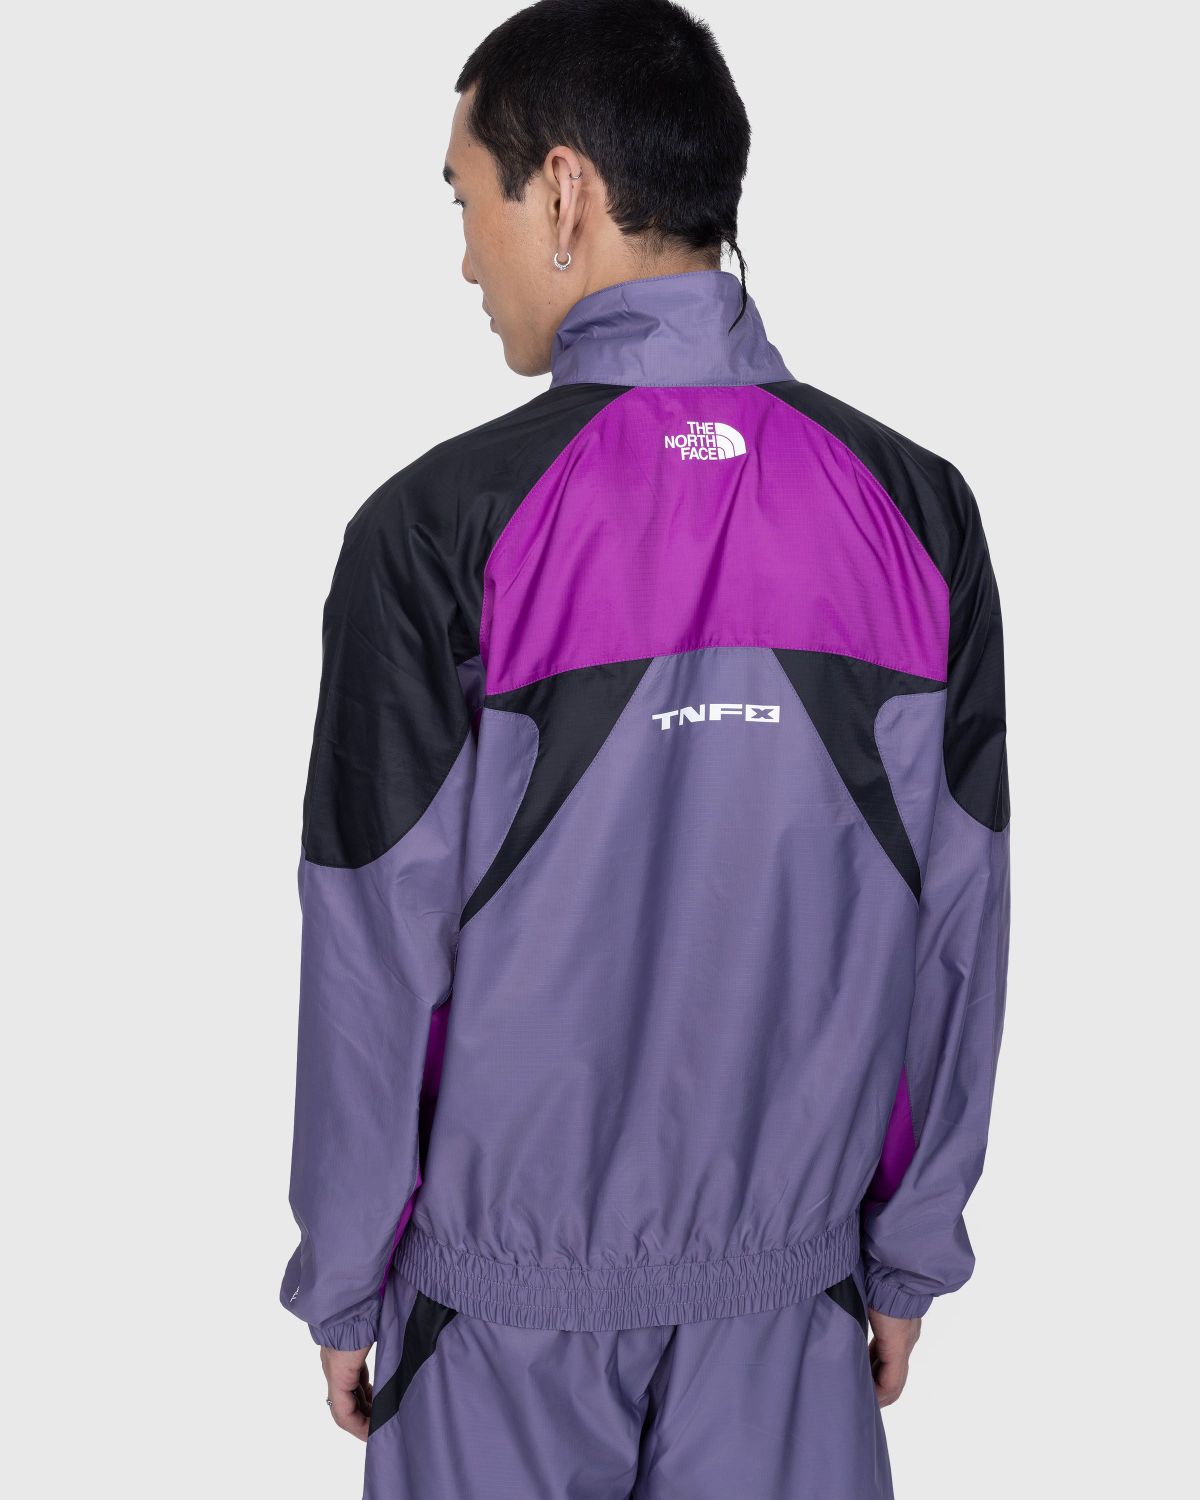 The North Face – TNF X Jacket Purple - Outerwear - Blue - Image 3